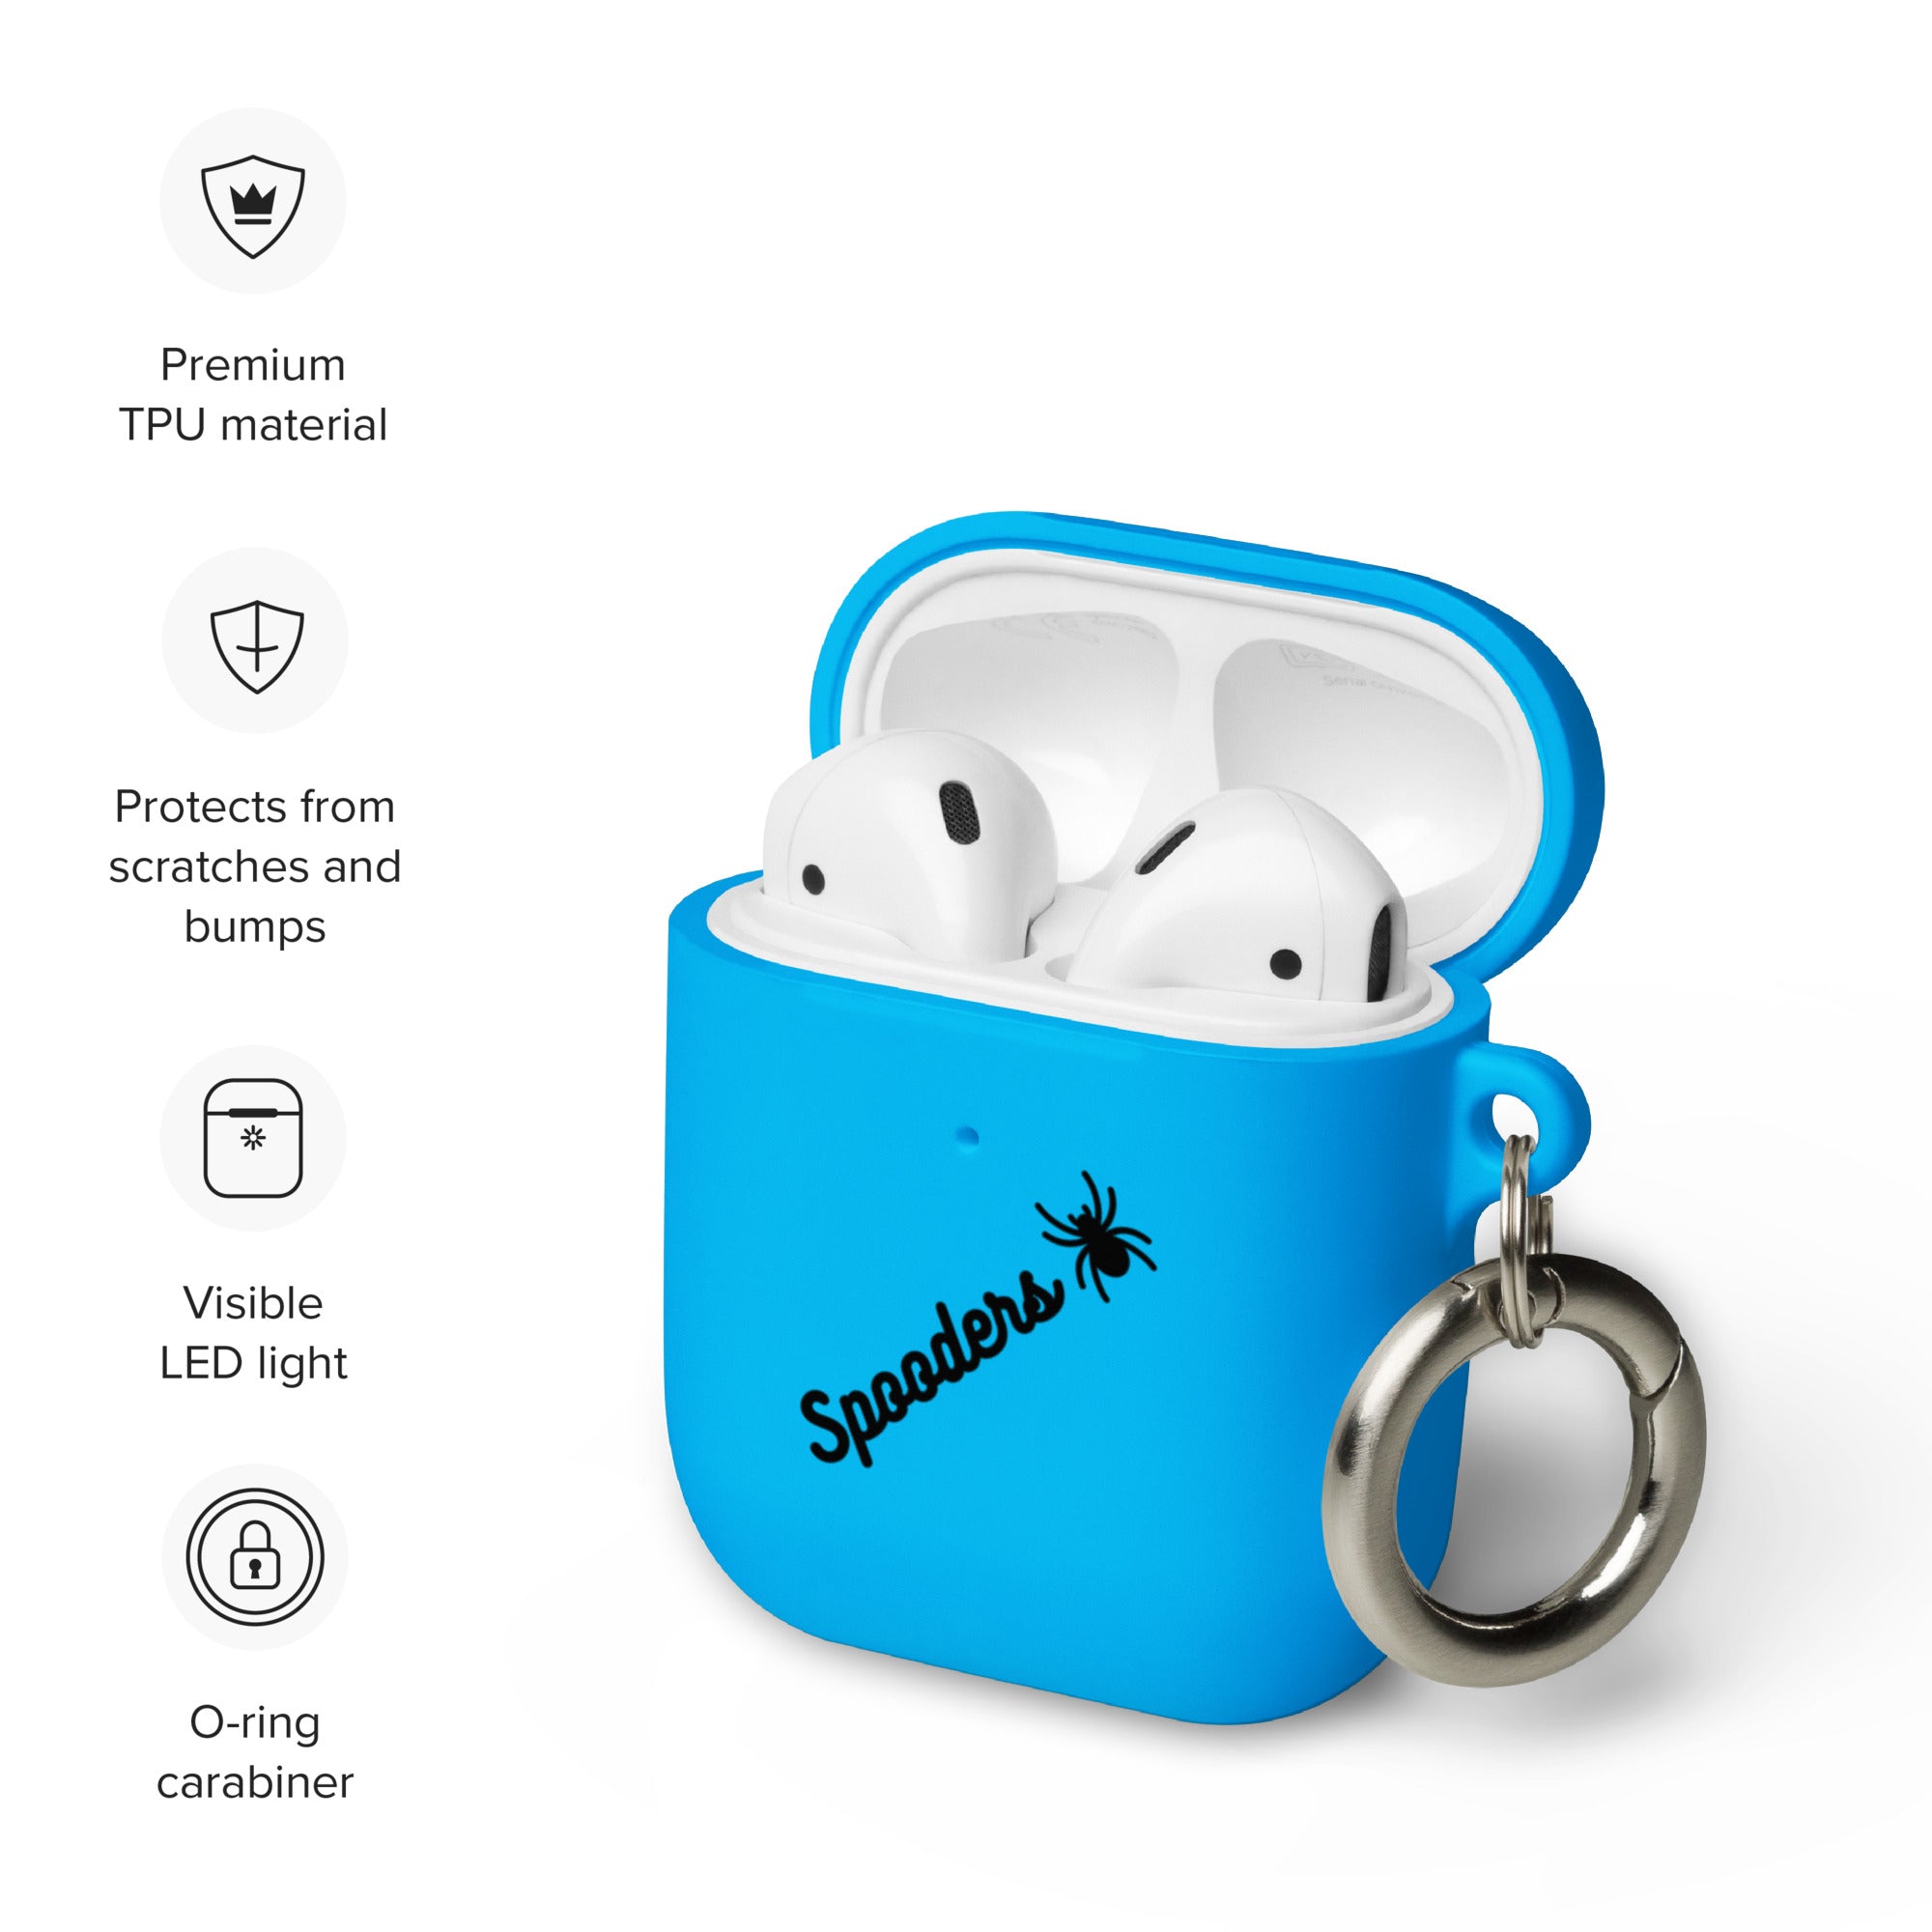 Spooders AirPods case - Jumping Spiders For Sale - Spiders Source - #1 Regal Jumping Spider Store